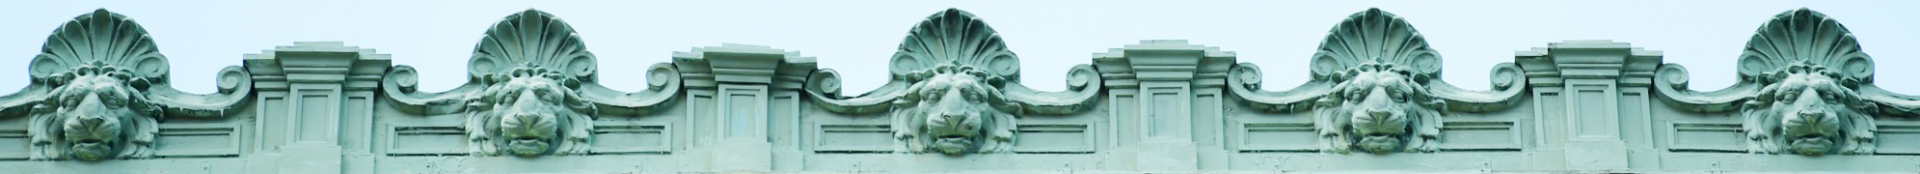 Image of Columbia University architectural stone lion heads